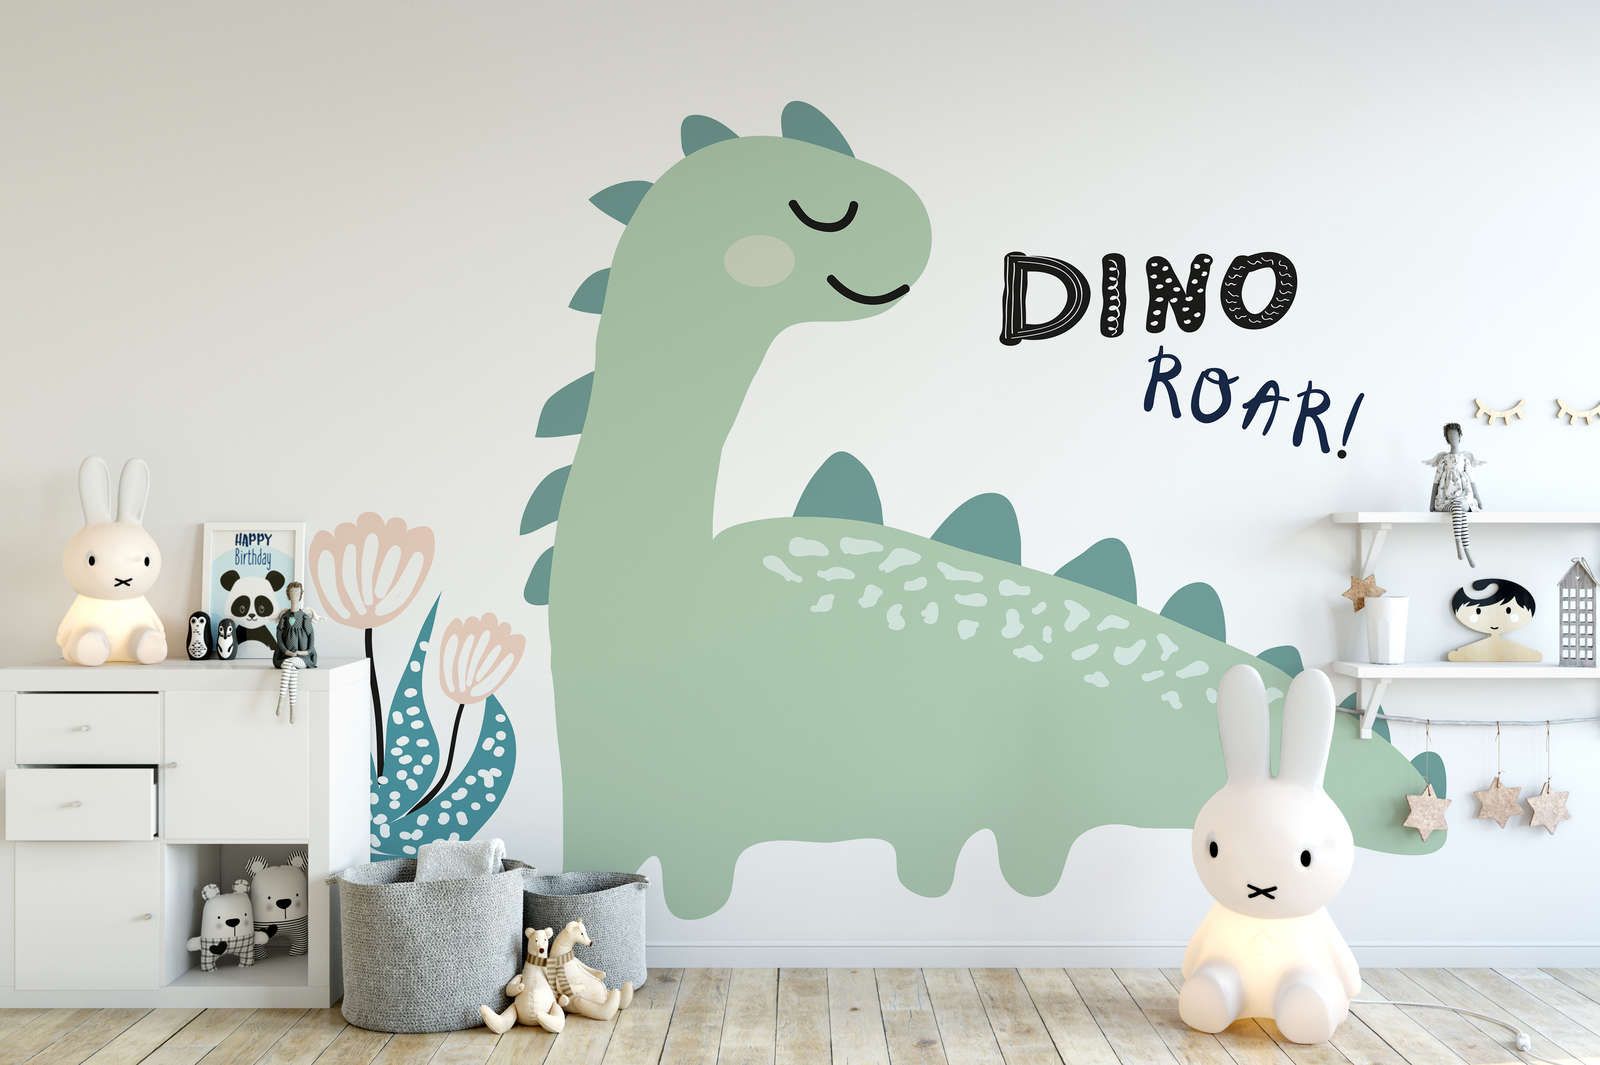             Painted Dinosaur Wallpaper - Smooth & Light Glossy Non-woven
        